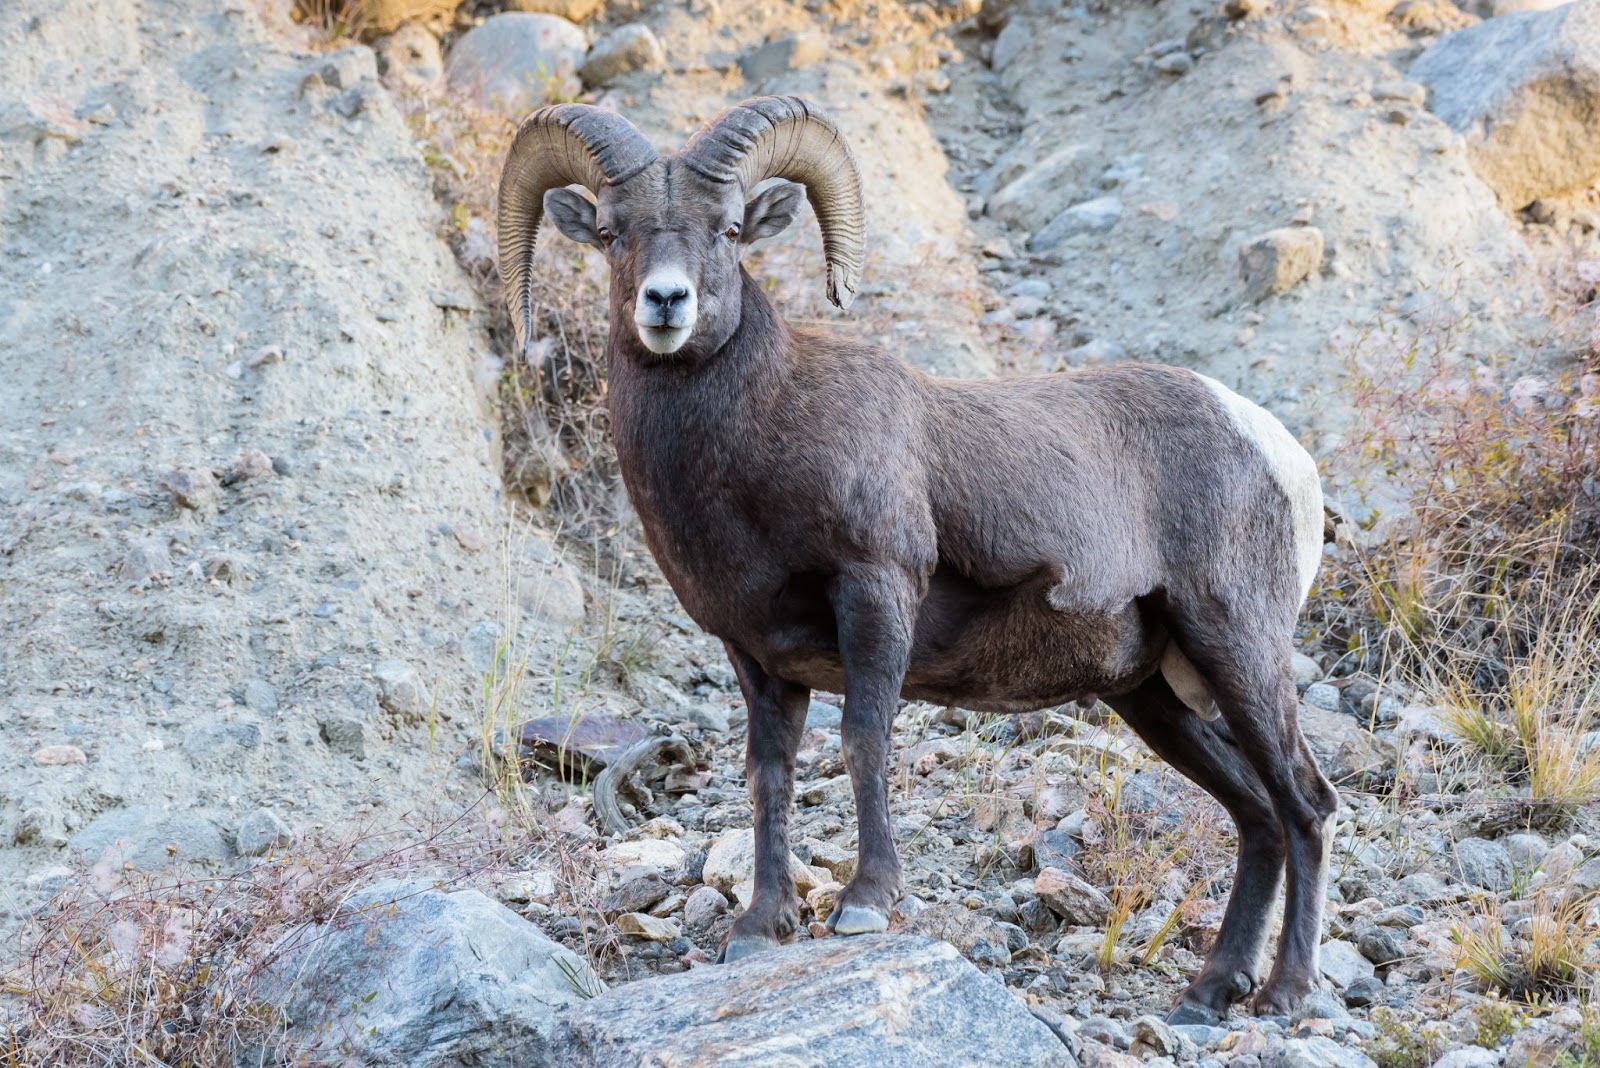 A ram standing on a rocky hillside in Mexico, with hunting equipment laid out nearby